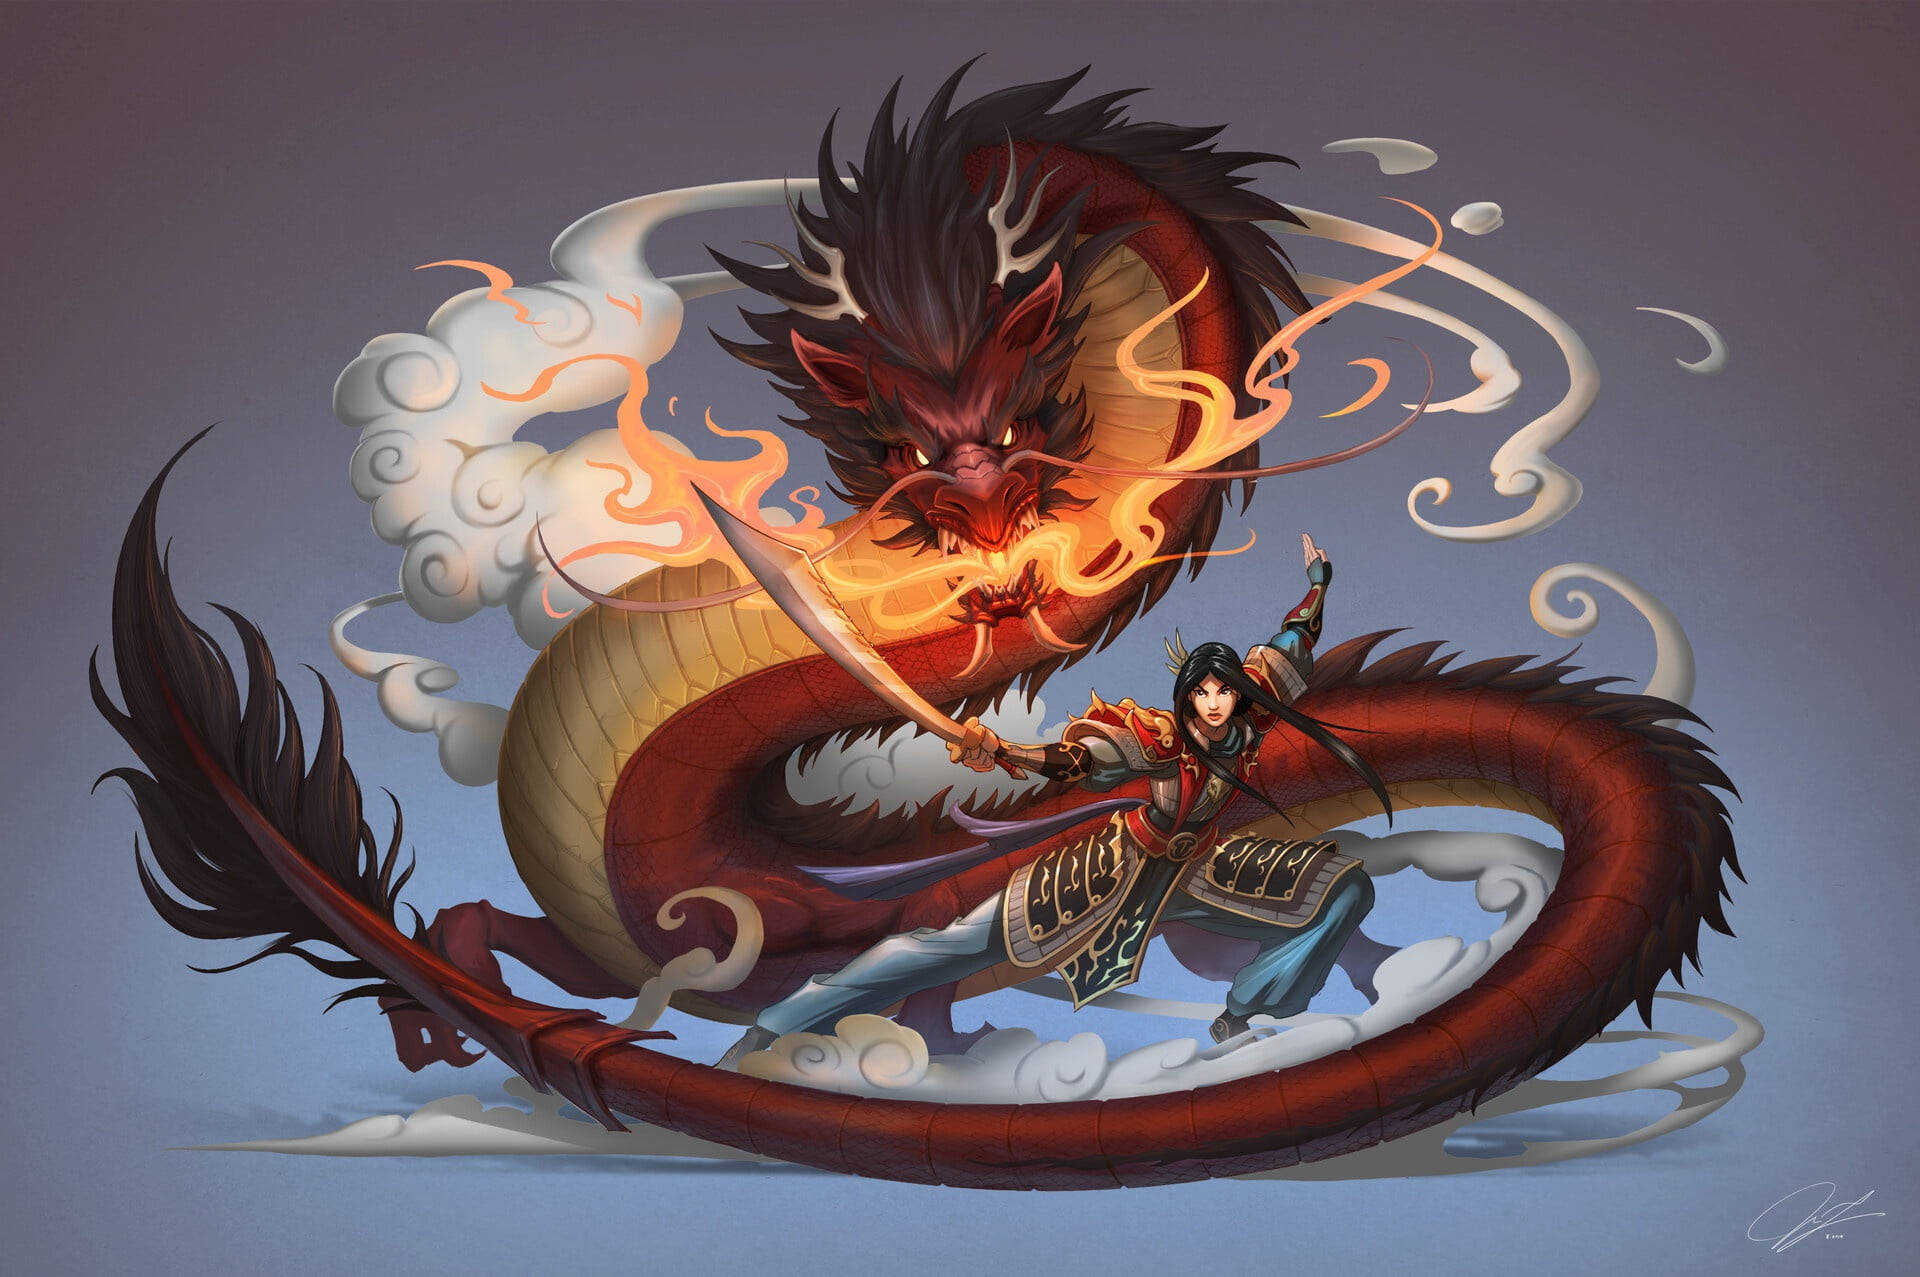 A Realistic Artistic Rendering Of Mulan And Her Famed Guardian Mushu Background